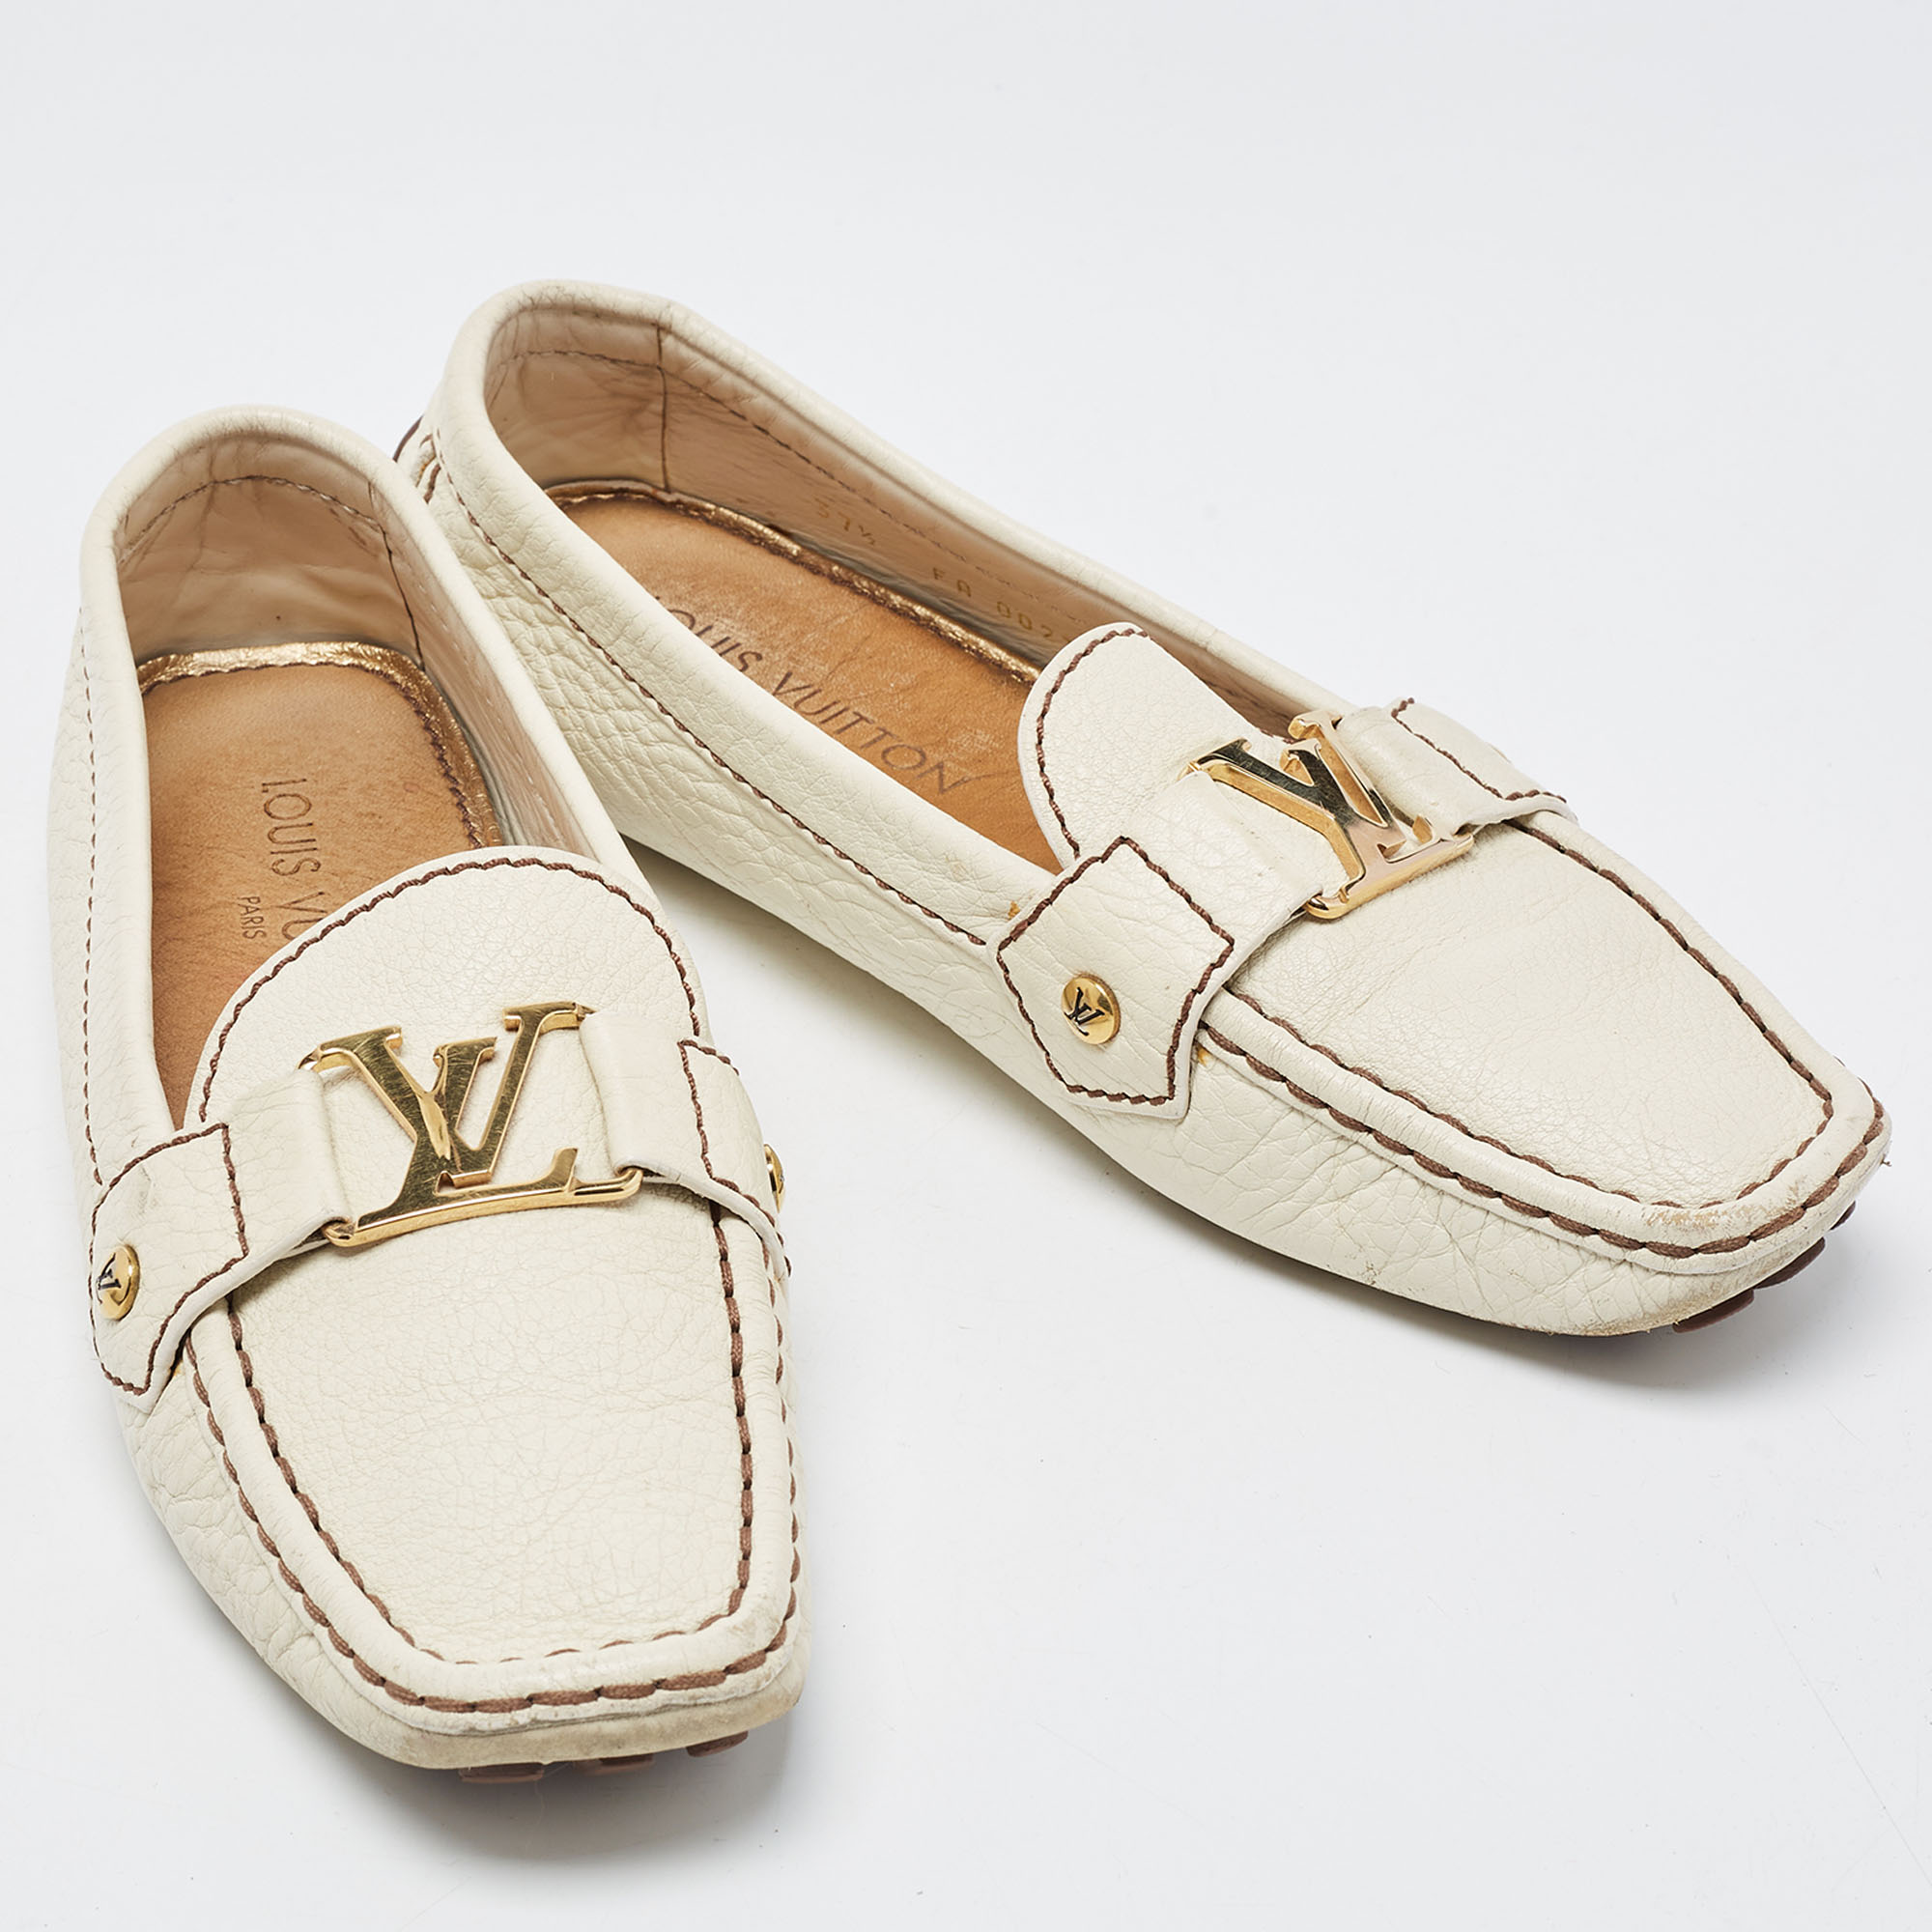 Louis Vuitton Cream Leather Oxford Loafers Size 37.5